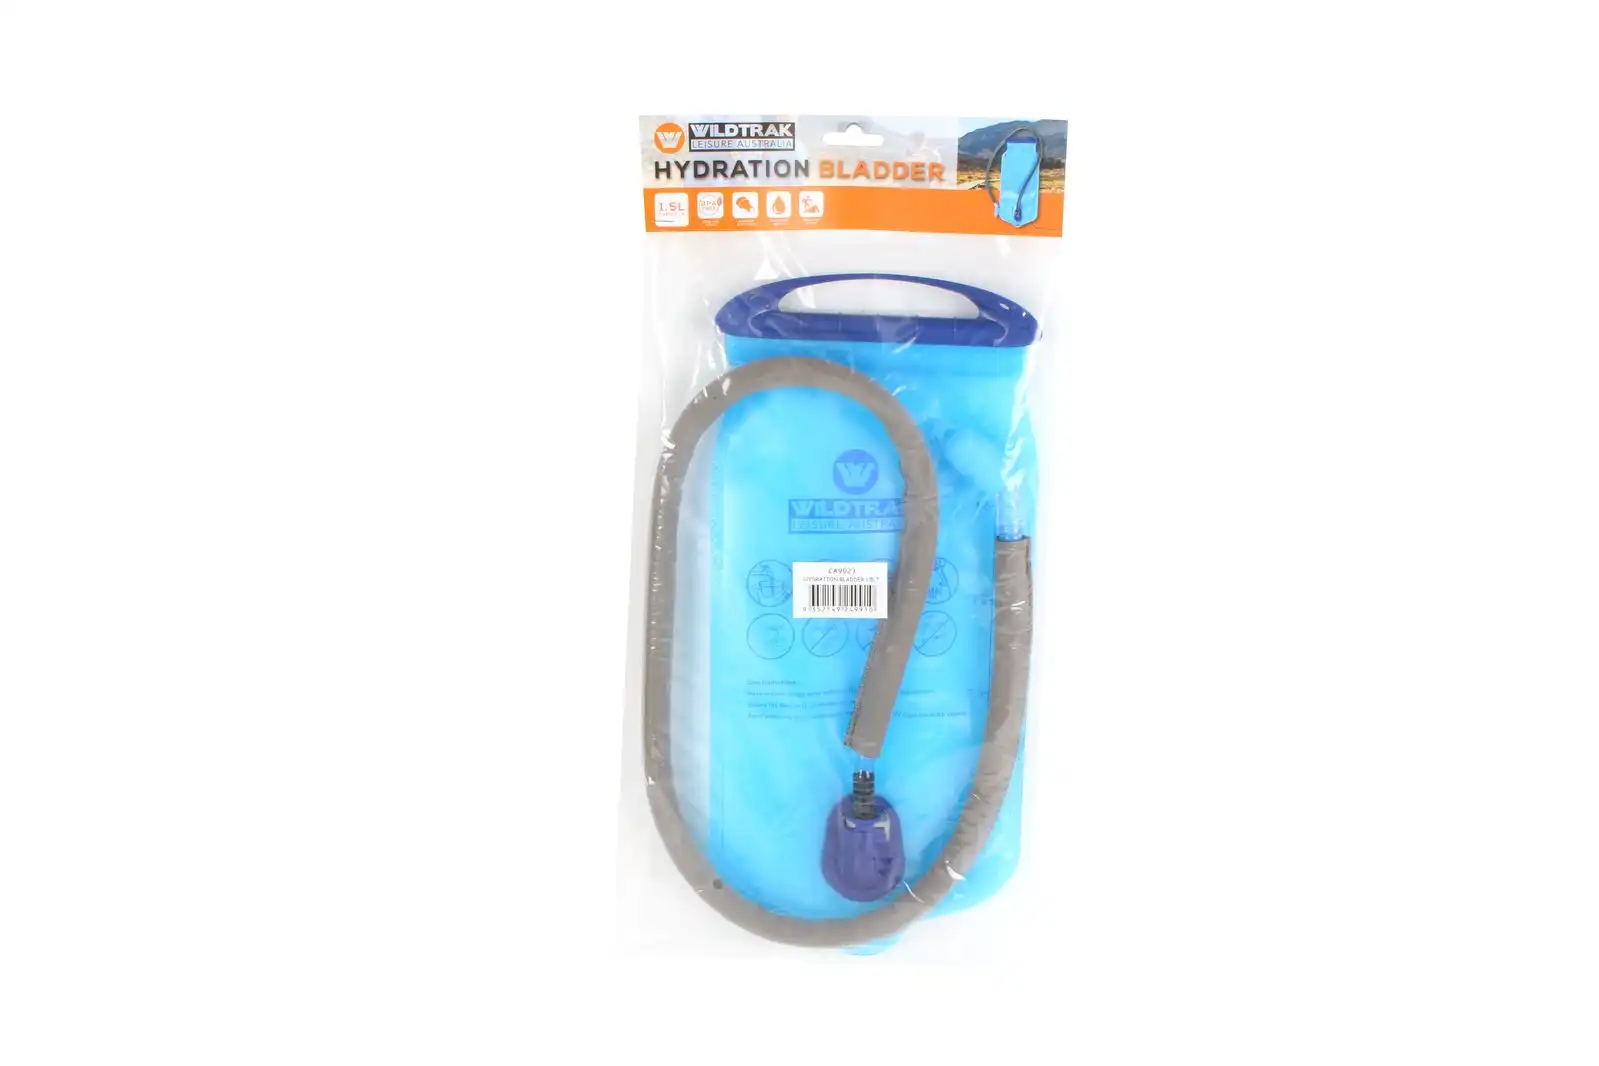 Wildtrak 1.5L Hydration Bladder Pack Outdoor Camping Water Drink Container Blue